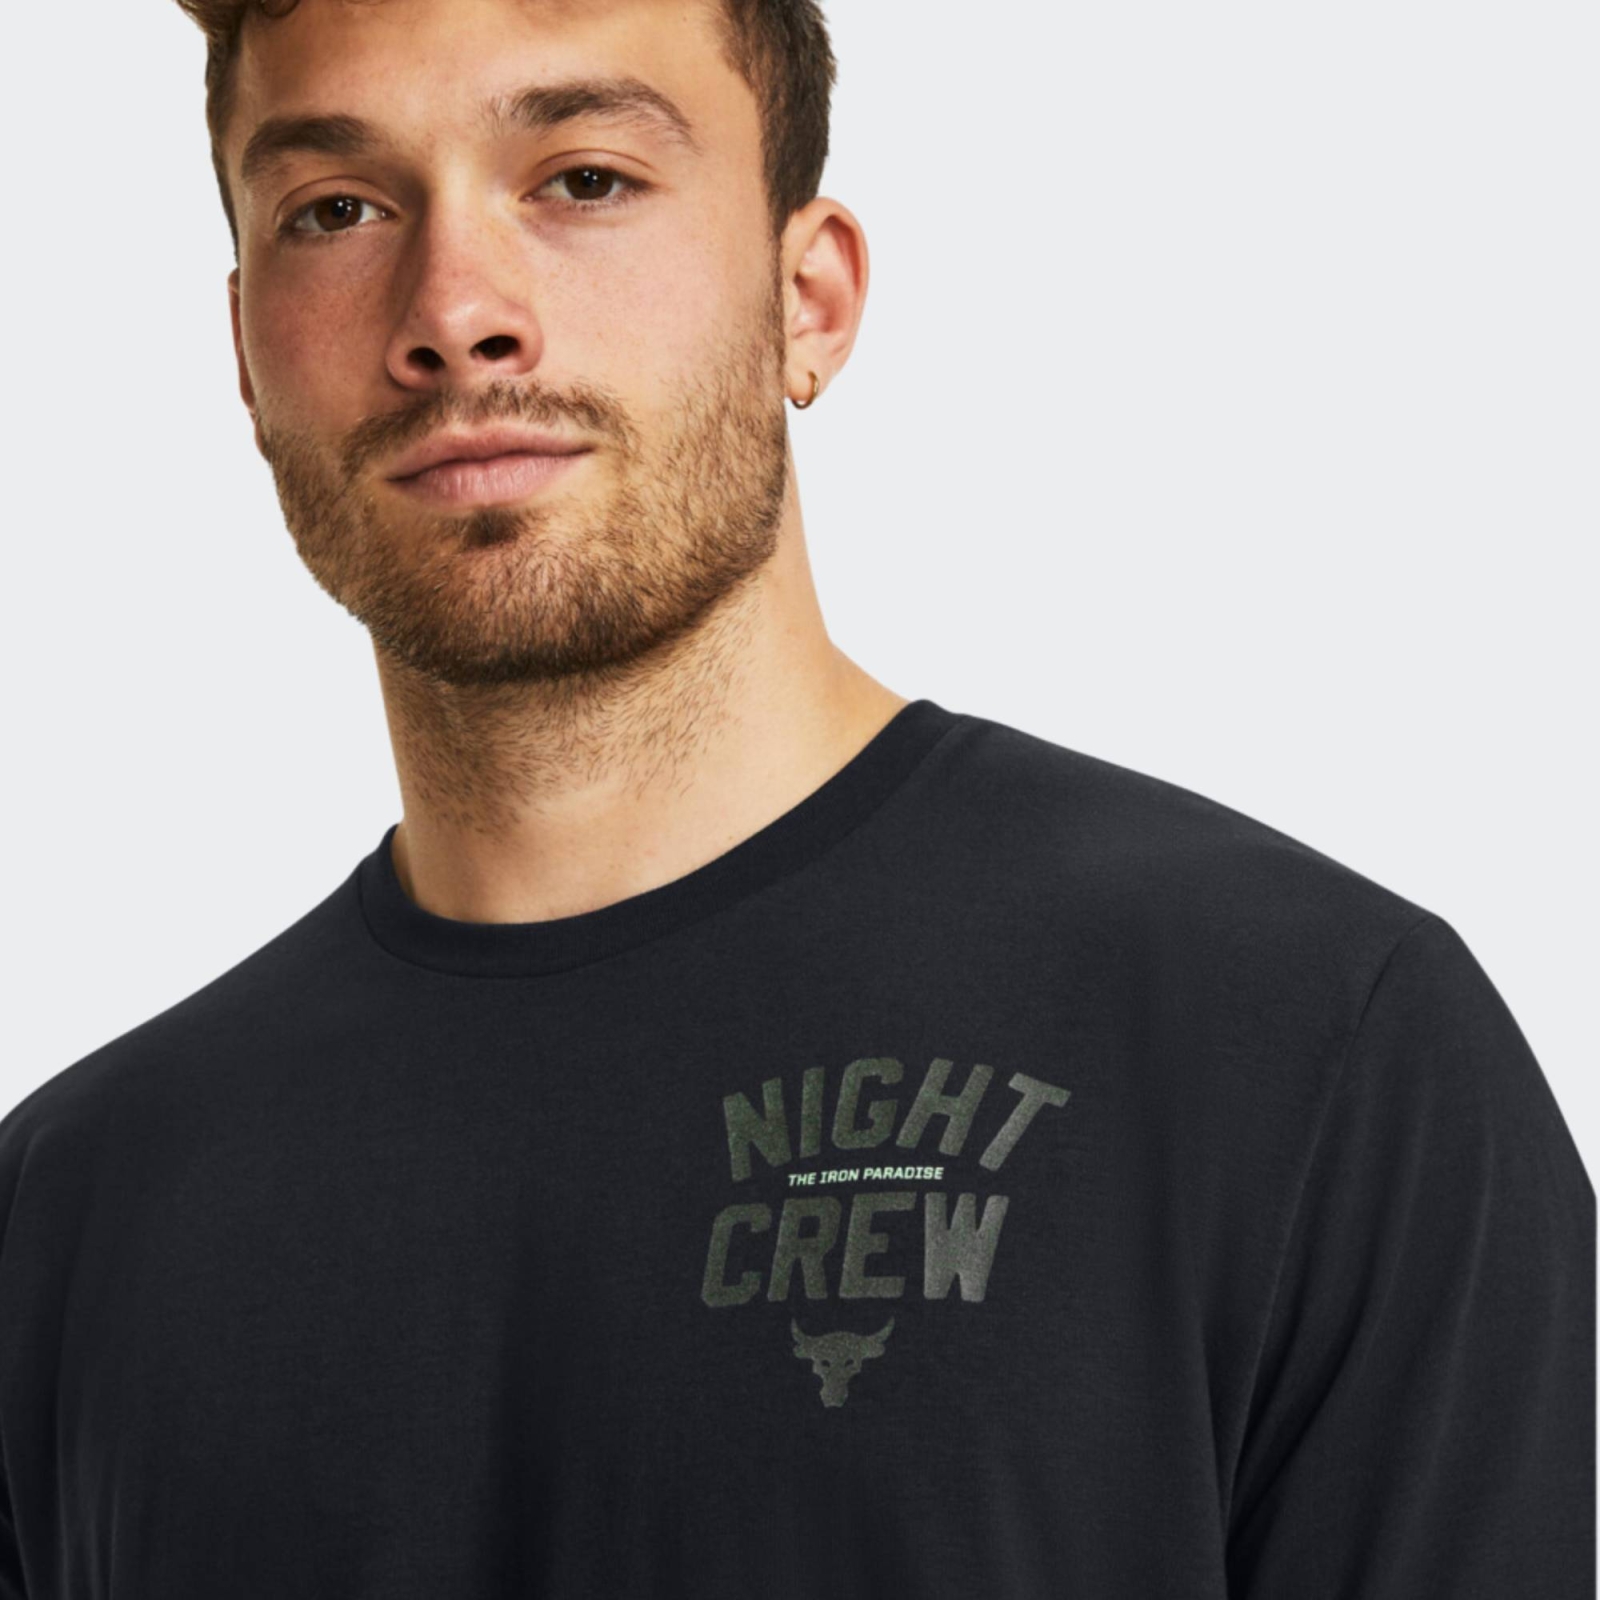 UNDER ARMOUR PROJECT ROCK NIGHT CREW TEE